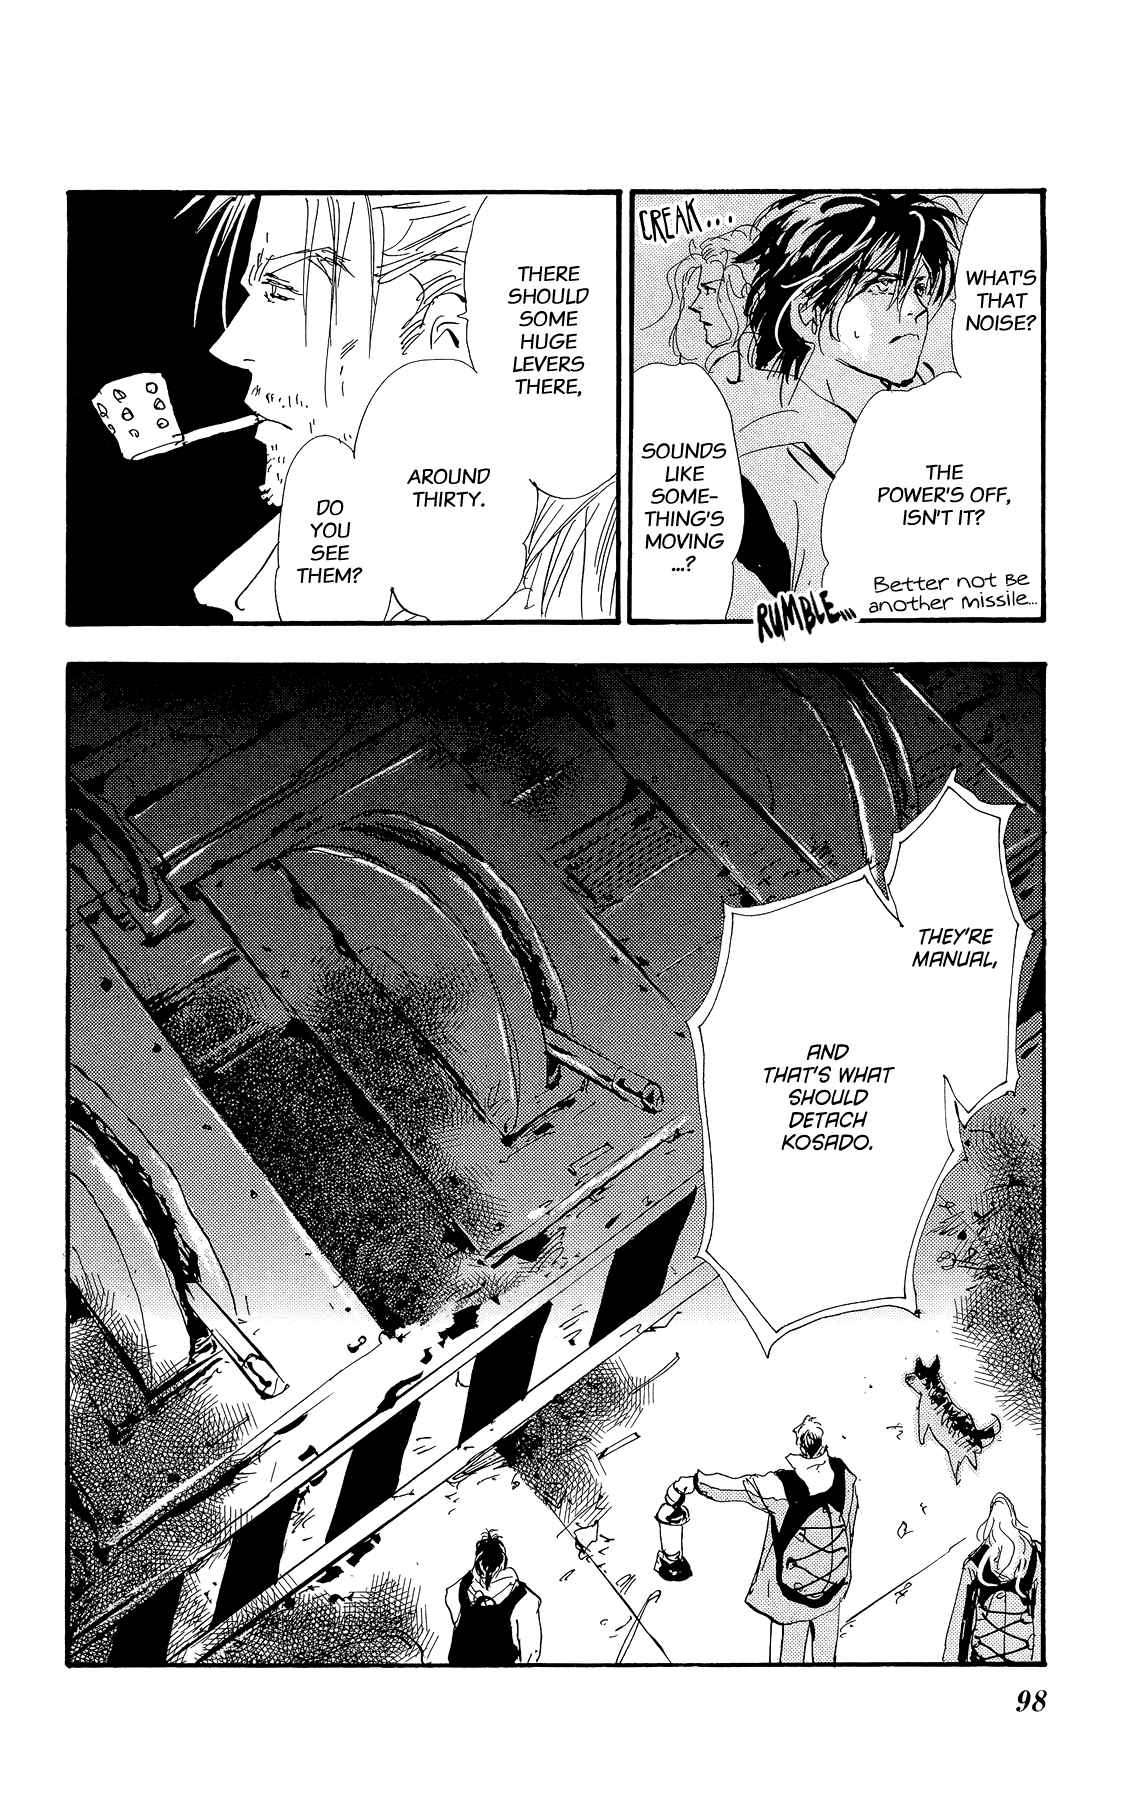 7 Seeds Vol. 32 Ch. 164 Sky Chapter 1 [Bitter Cold]